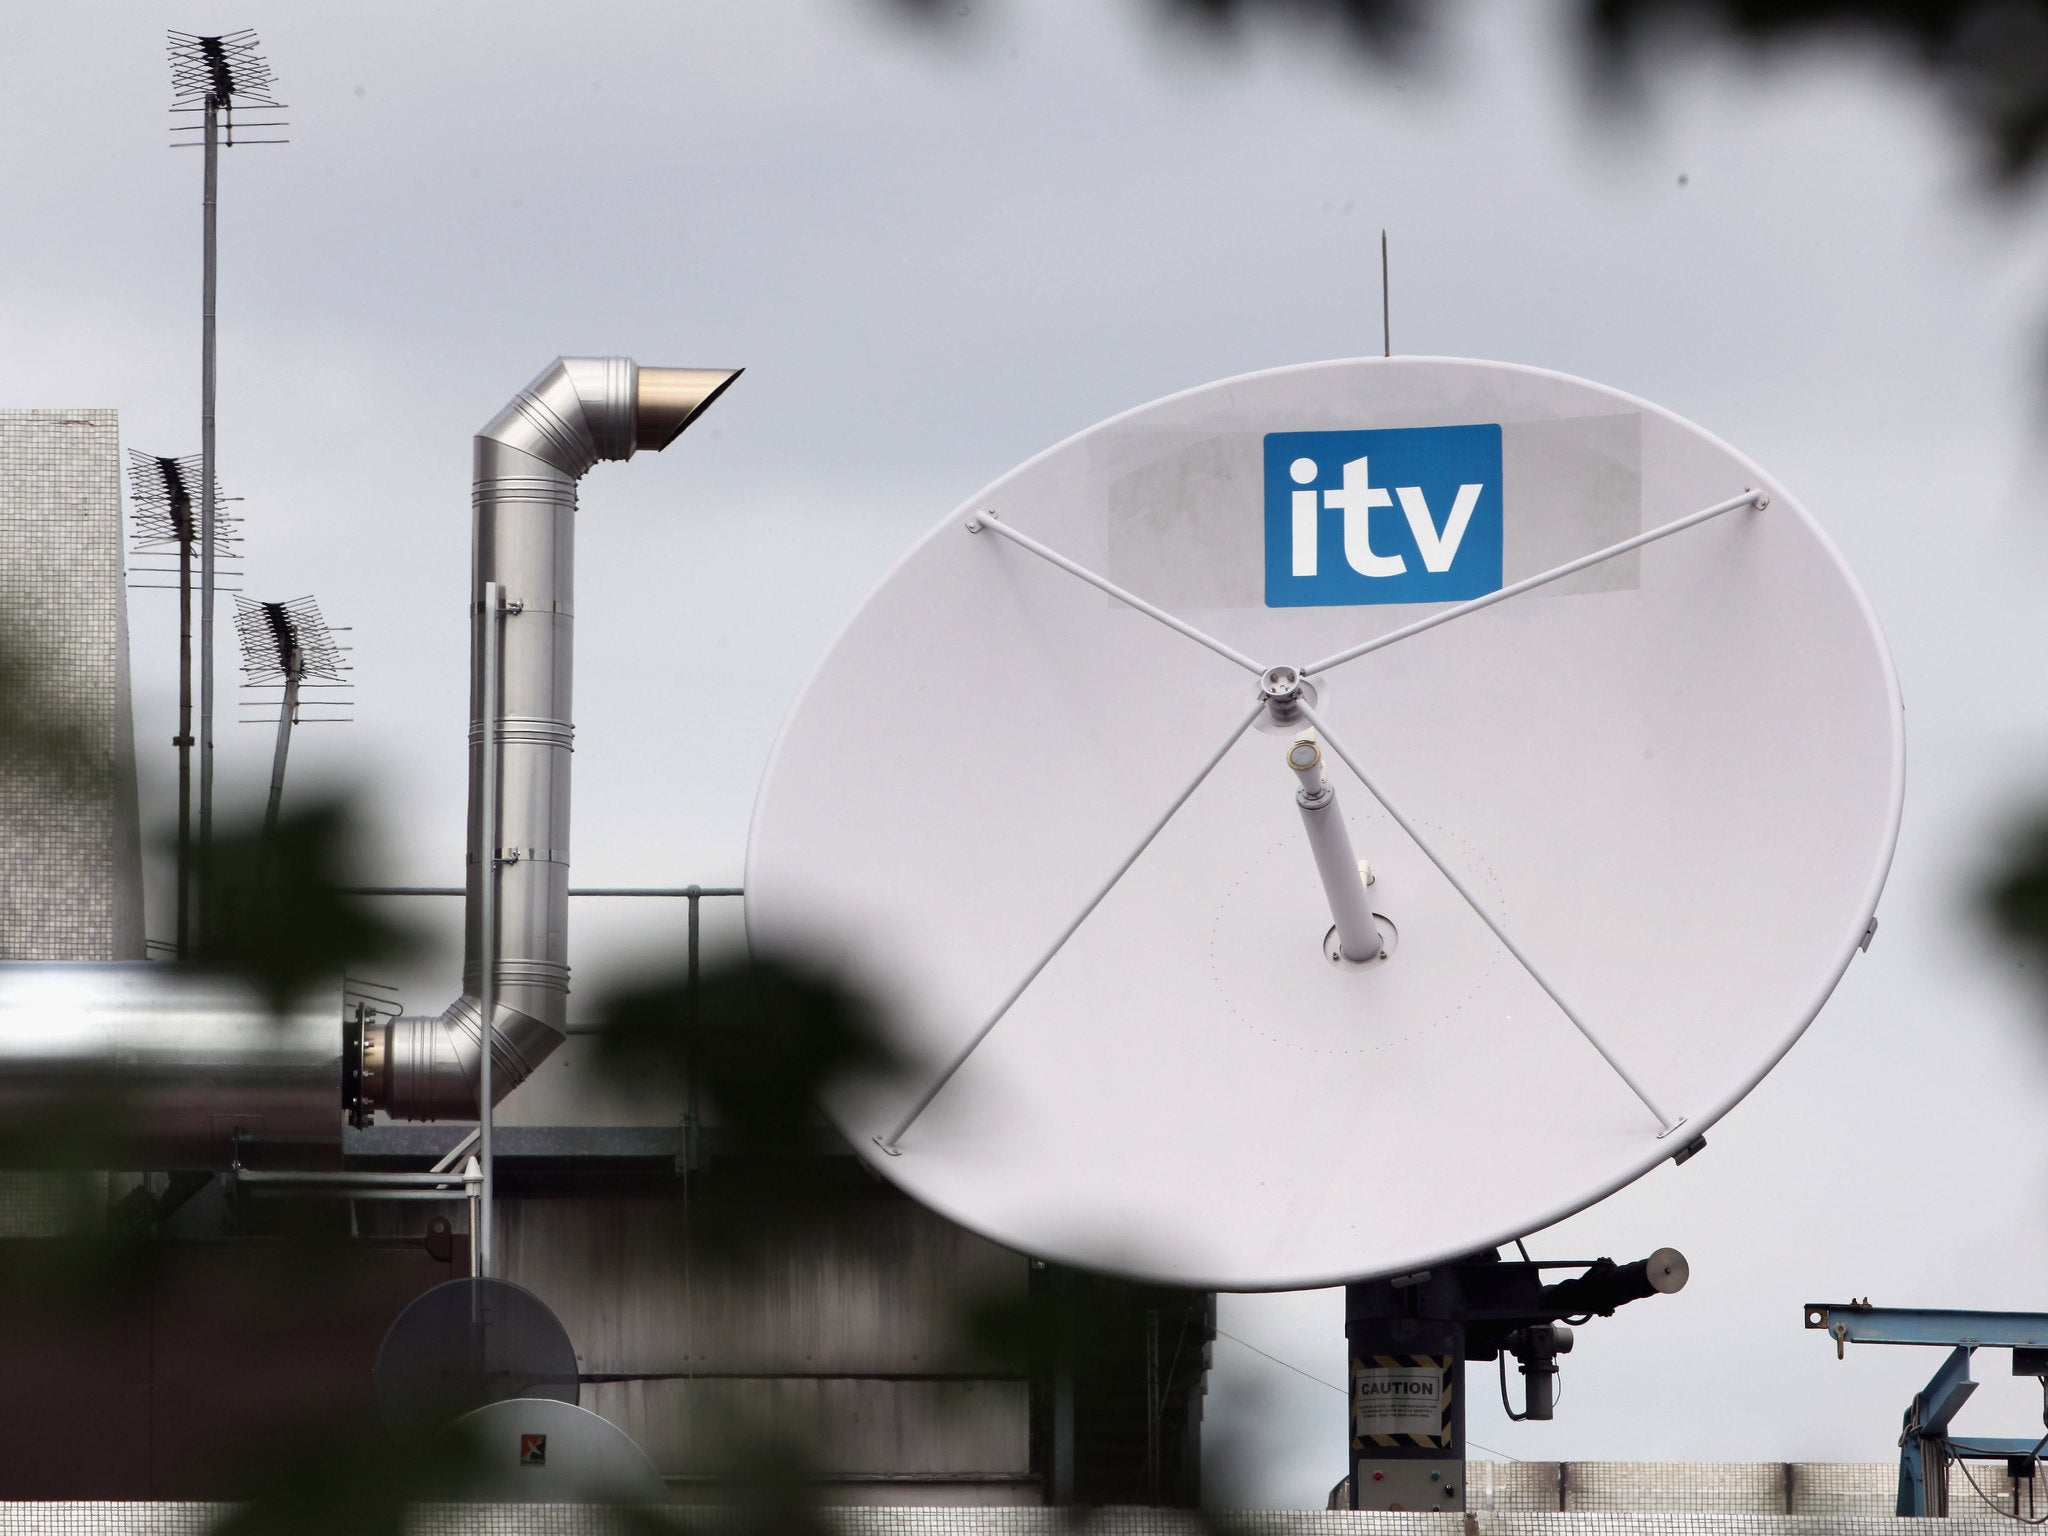 Despite ITV as a company enduring an overall decline of 5 per cent in its audience share in 2014, it managed to increase advertising revenues by 6 per cent.